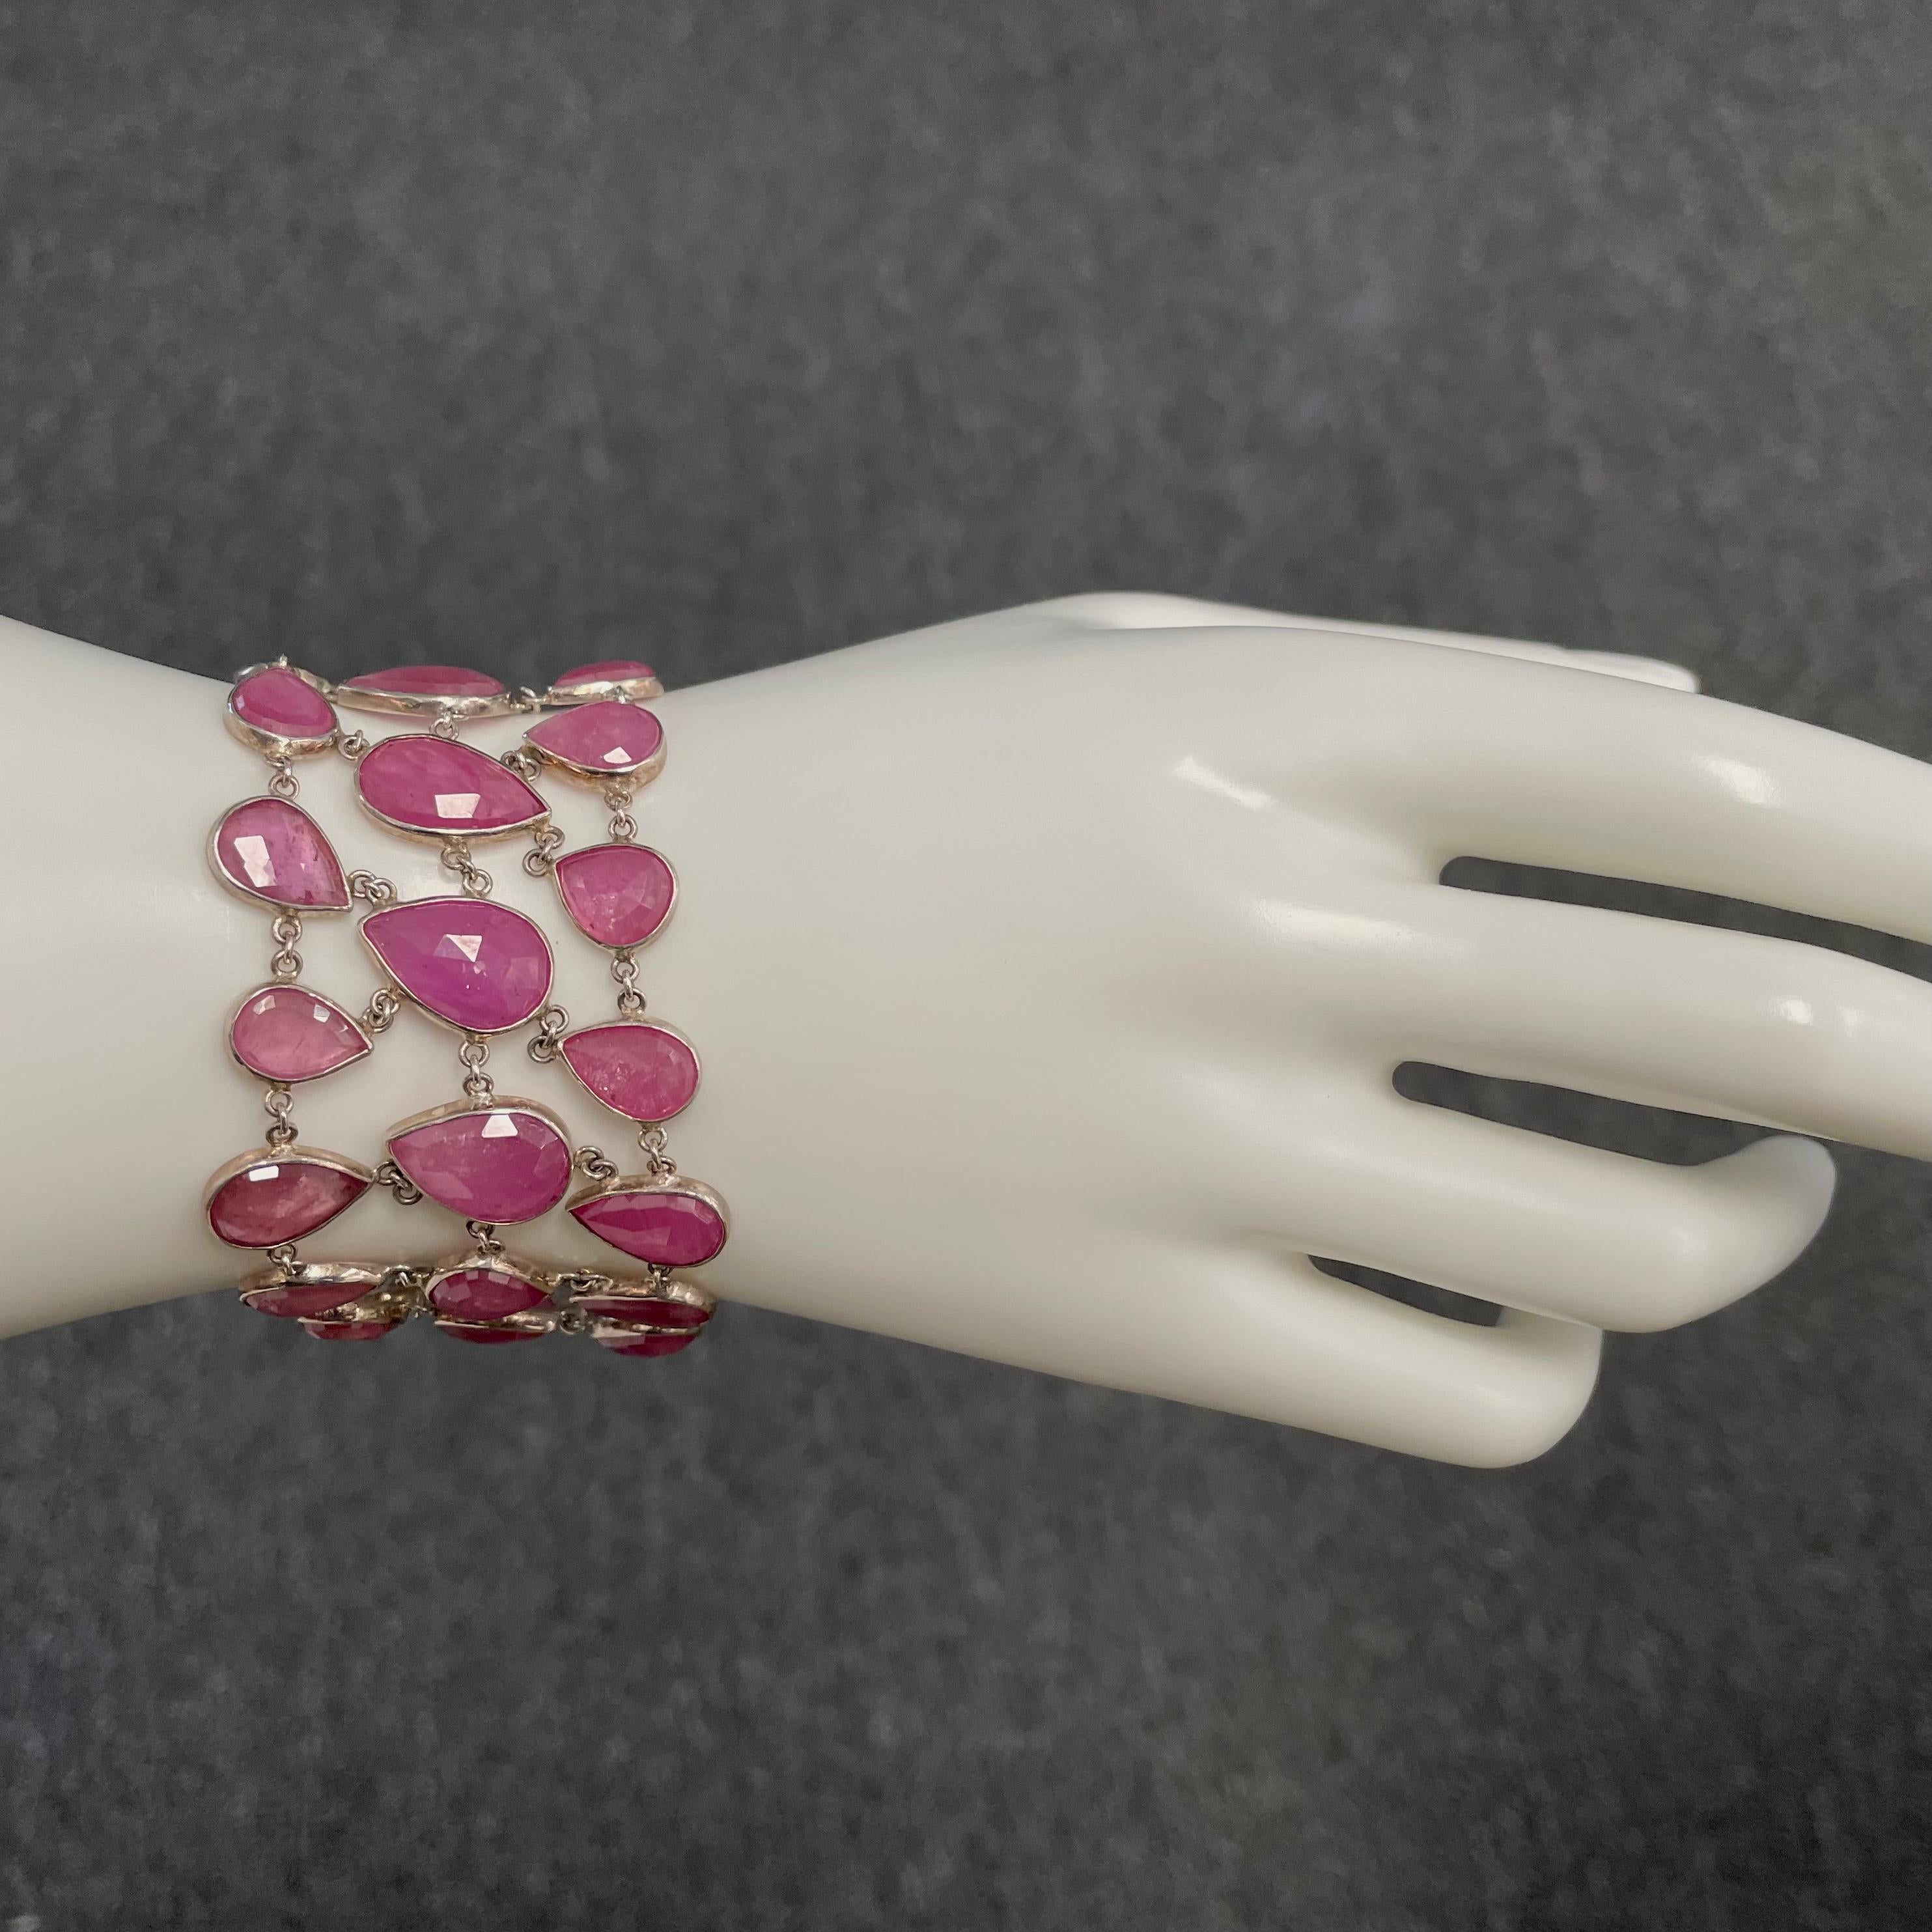 33 individual faceted pear shaped pink ruby stones from 6 x 9 mm to 9 x 15 mm are interlinked to form this beautiful and comfortable bracelet set in silver.  Current 7.5 inch length fits medium to larger wrists.  Fastens with a toggle clasp. It